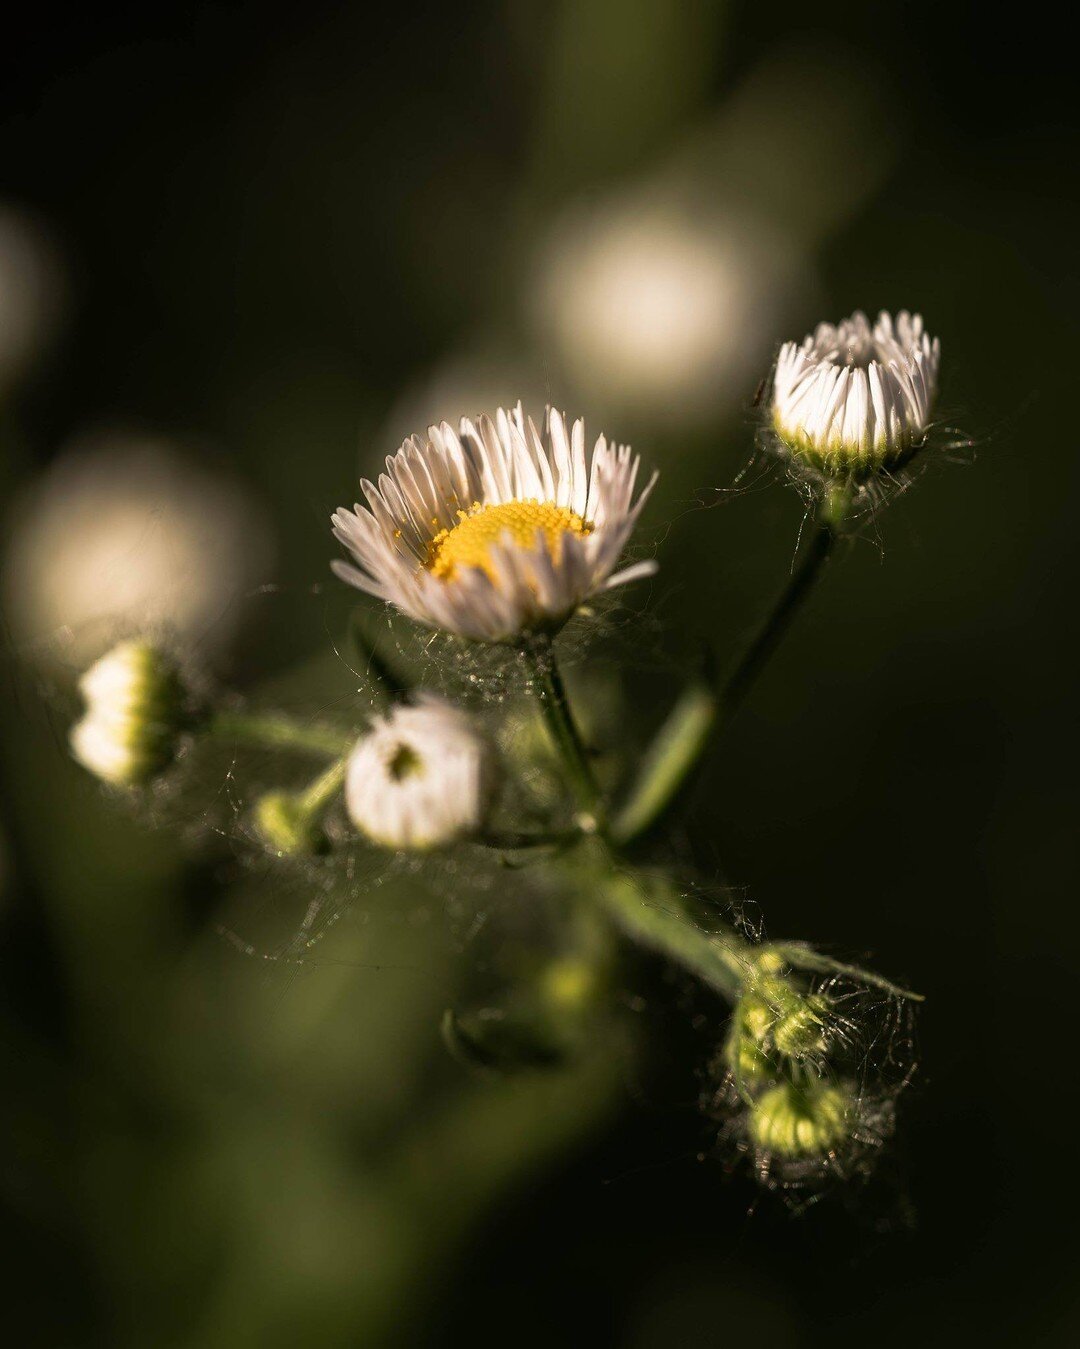 Annual fleabane (Erigeron annuus) is part of the aster family. While technically native in North America, it tends to have some weedy properties. They can be identified by their hairy stems, alternate leaves, and tiny daisy-like flowers, growing in s